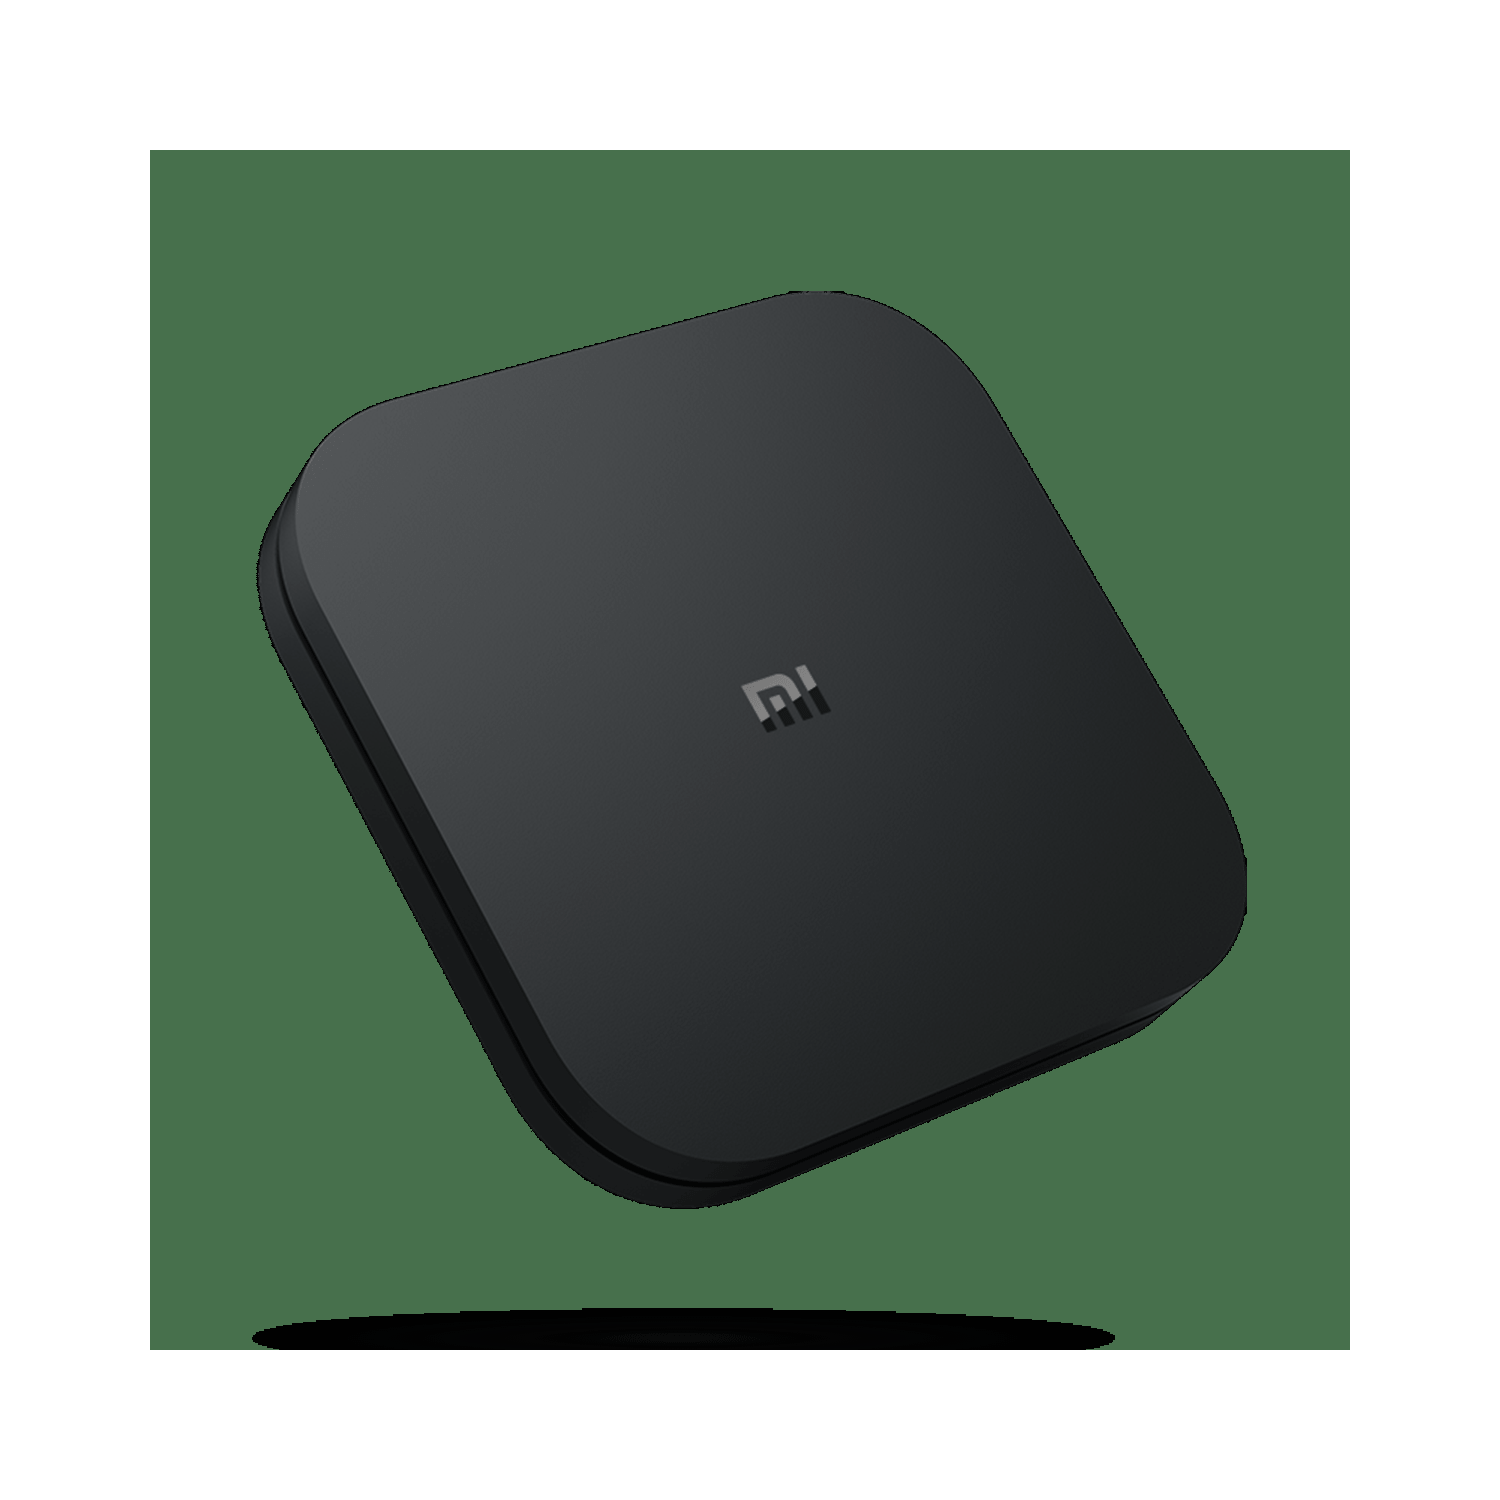 Xiaomi Mi Box S - 4K | 4K HDR Android TV with Google Assistant Remote Streaming Media Player